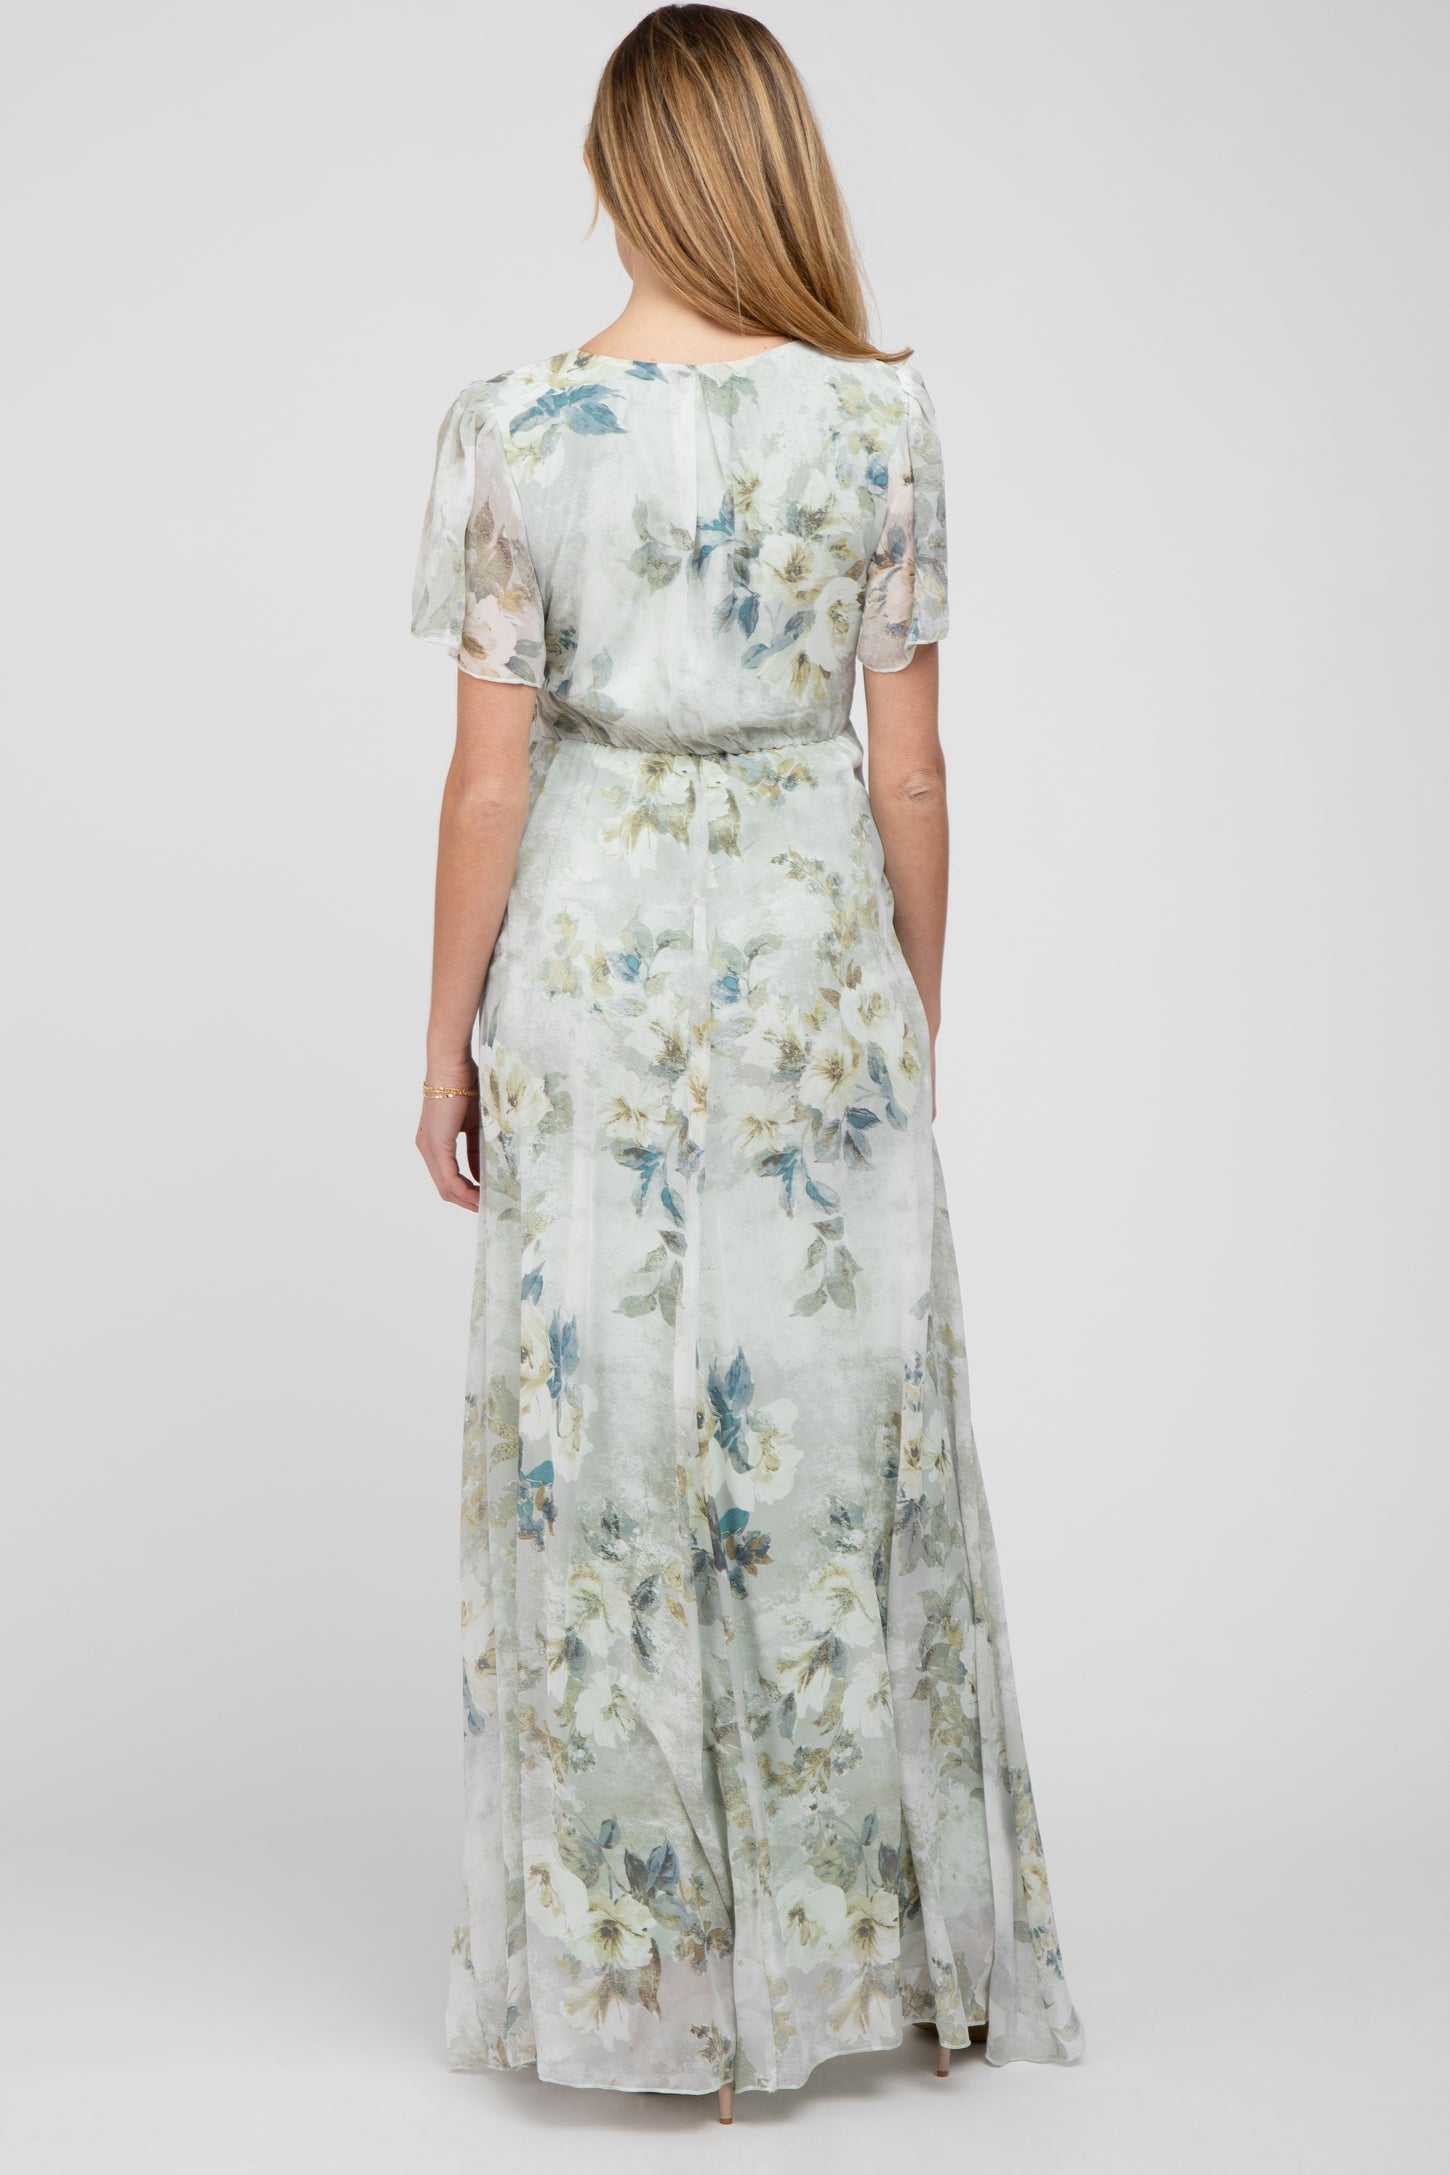 Light Olive Floral Chiffon Wrap Front Short Sleeve Maternity Maxi